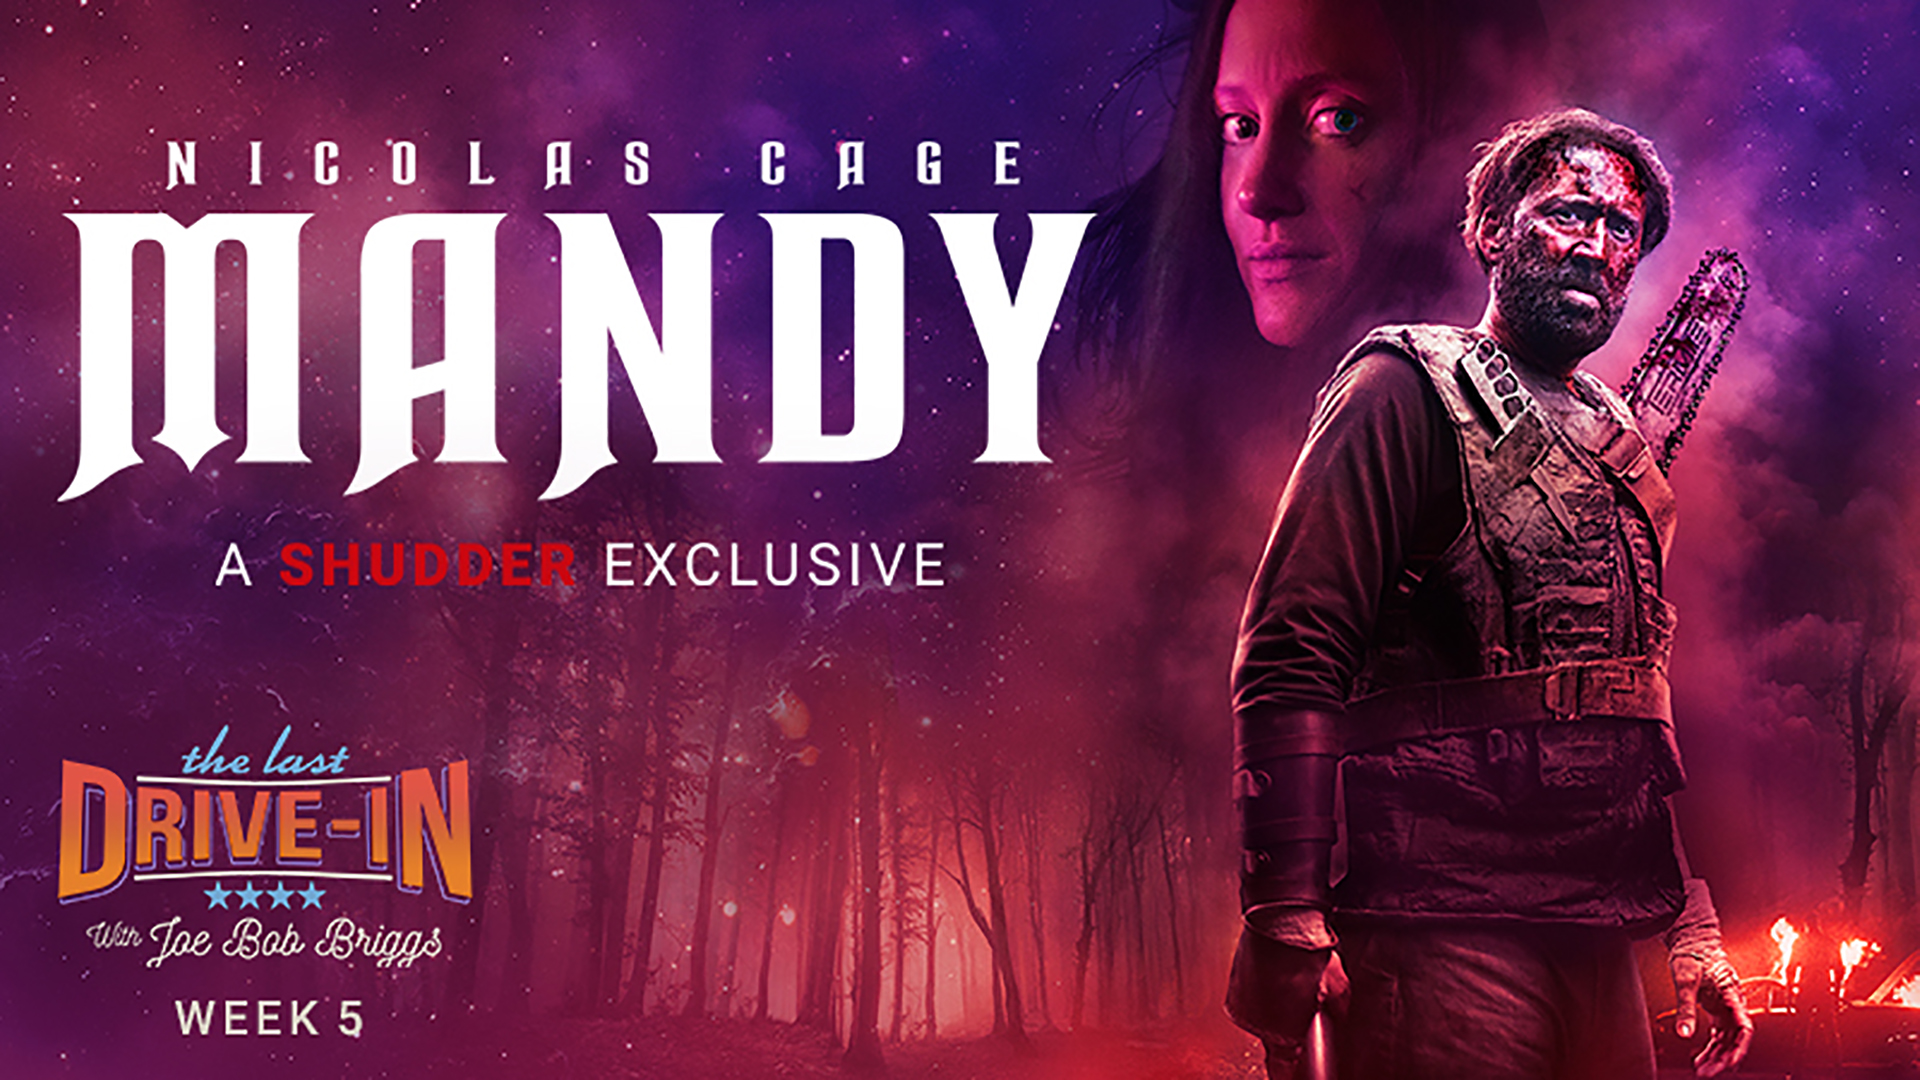 Week 5: Mandy, When a nightmarish cult attack Red and Mandy, the shocking assault leads to a spiraling, surreal, bloody rampage of all out, mind-altering vengeance., TV-MA, Season 1028423, Episode 9